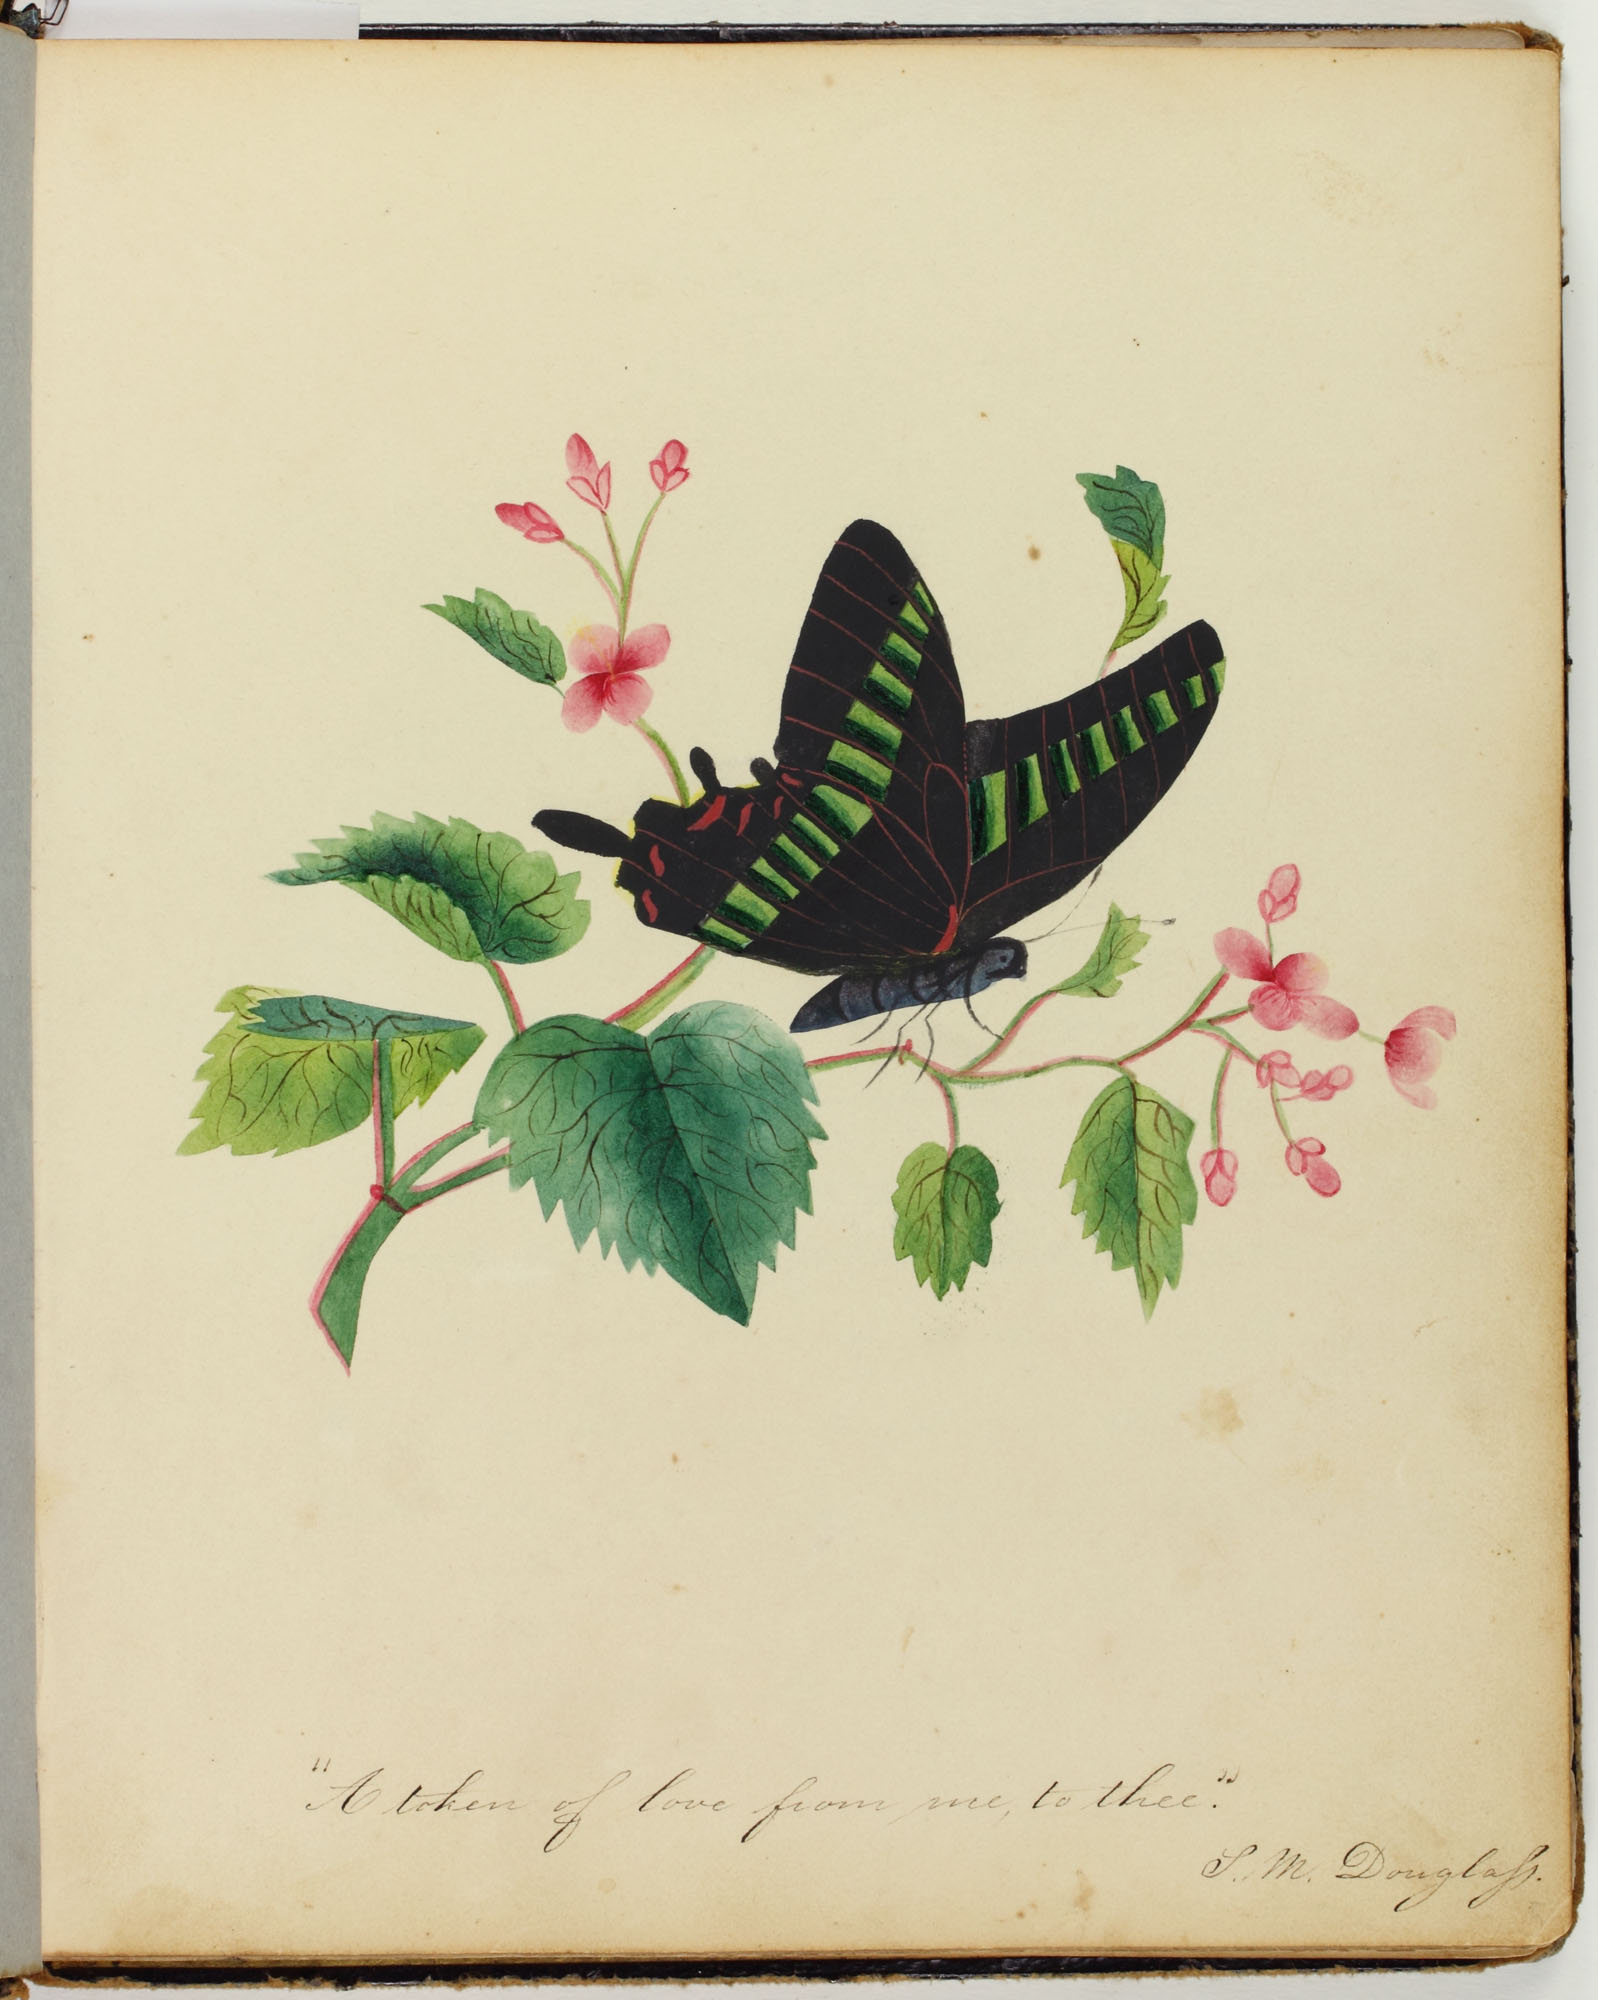 Sarah Mapps Douglass, “A token of love from me to thee,” Amy Matilda Cassey Album, 1833-1856. Watercolor, undated. Library Company of Philadelphia.